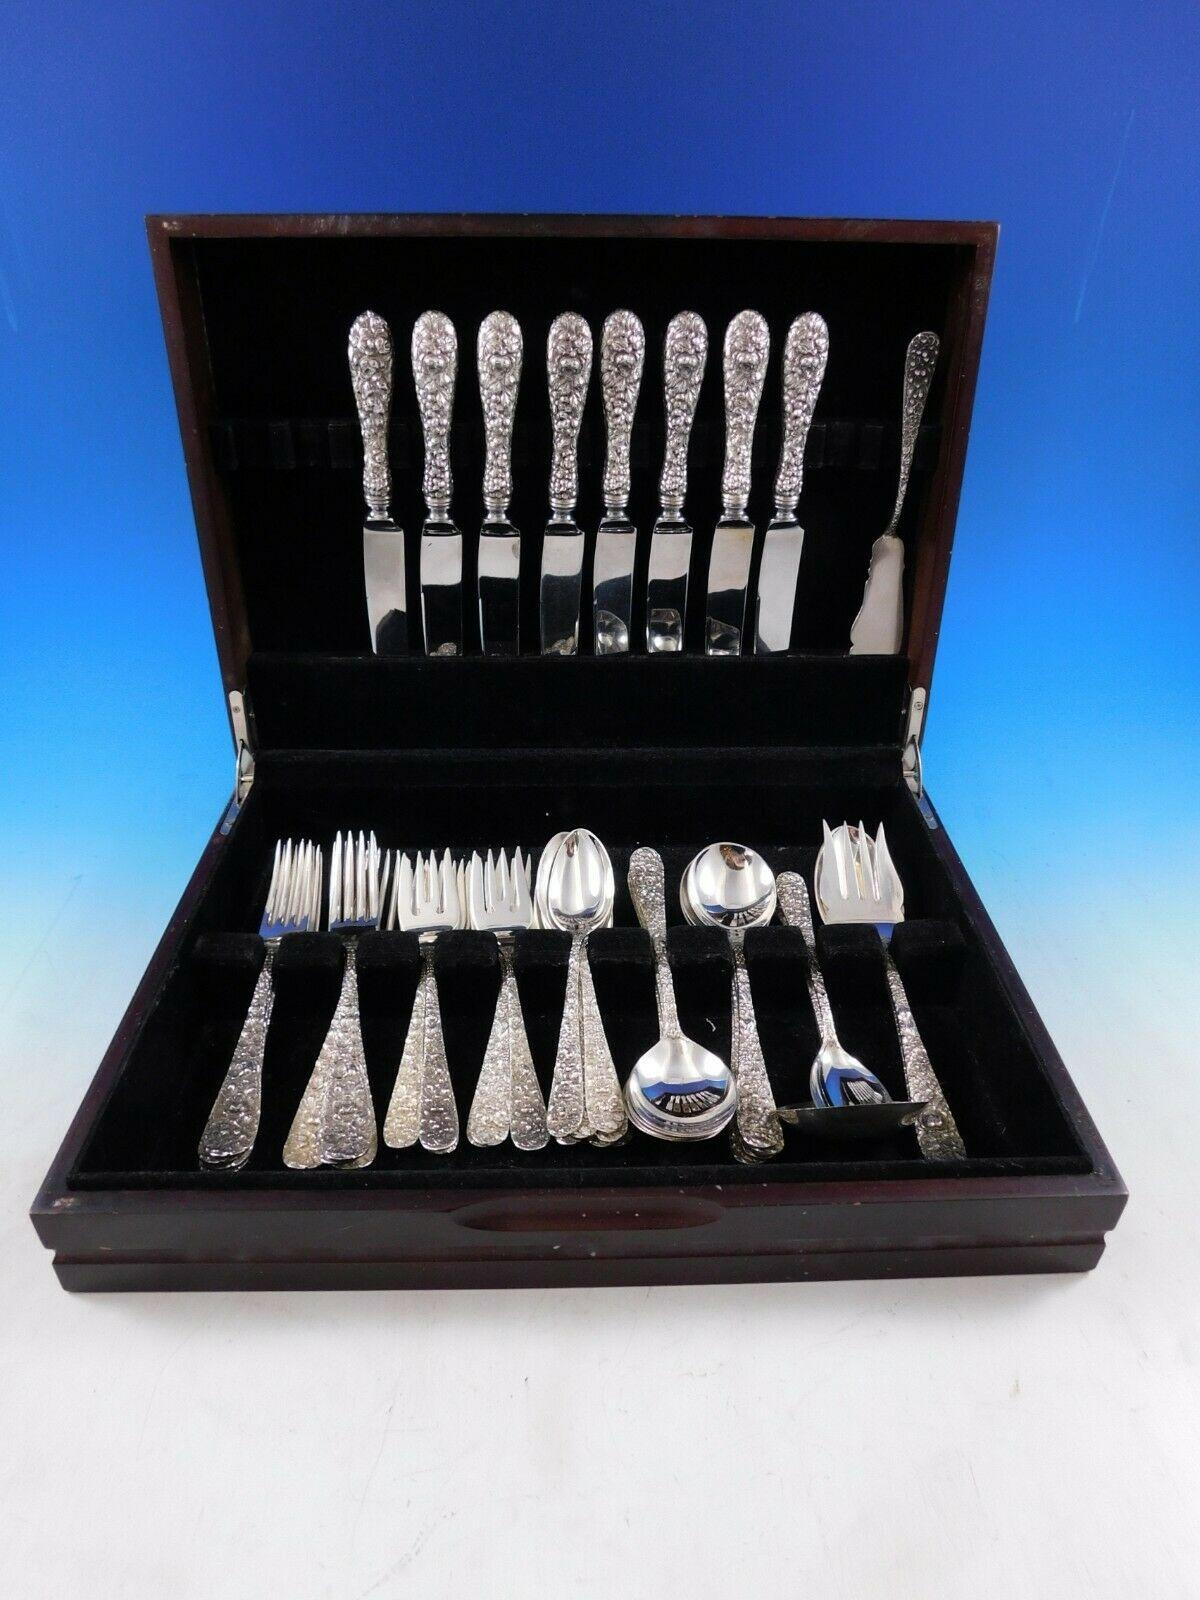 Rose by Stieff repousse sterling silver flatware set - 45 pieces. This set includes:

8 Knives, 8 3/4